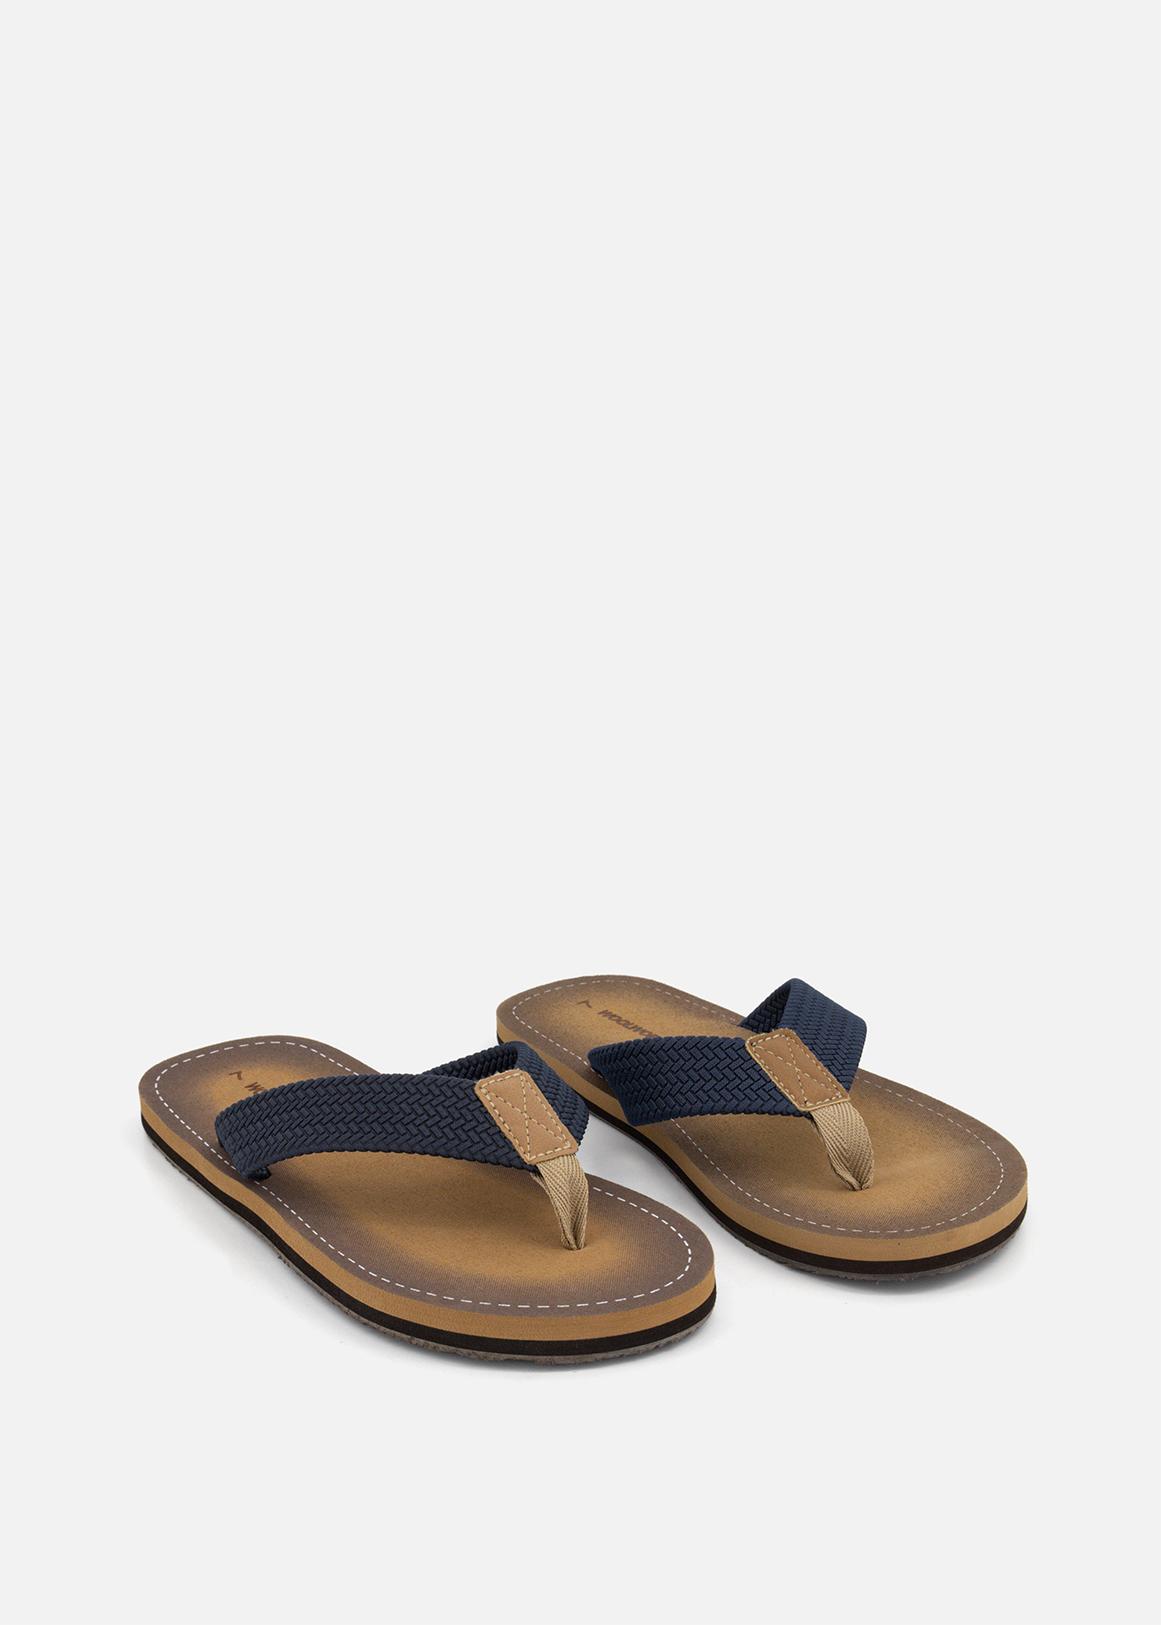 Comfy Thongs, Jandals, Brown